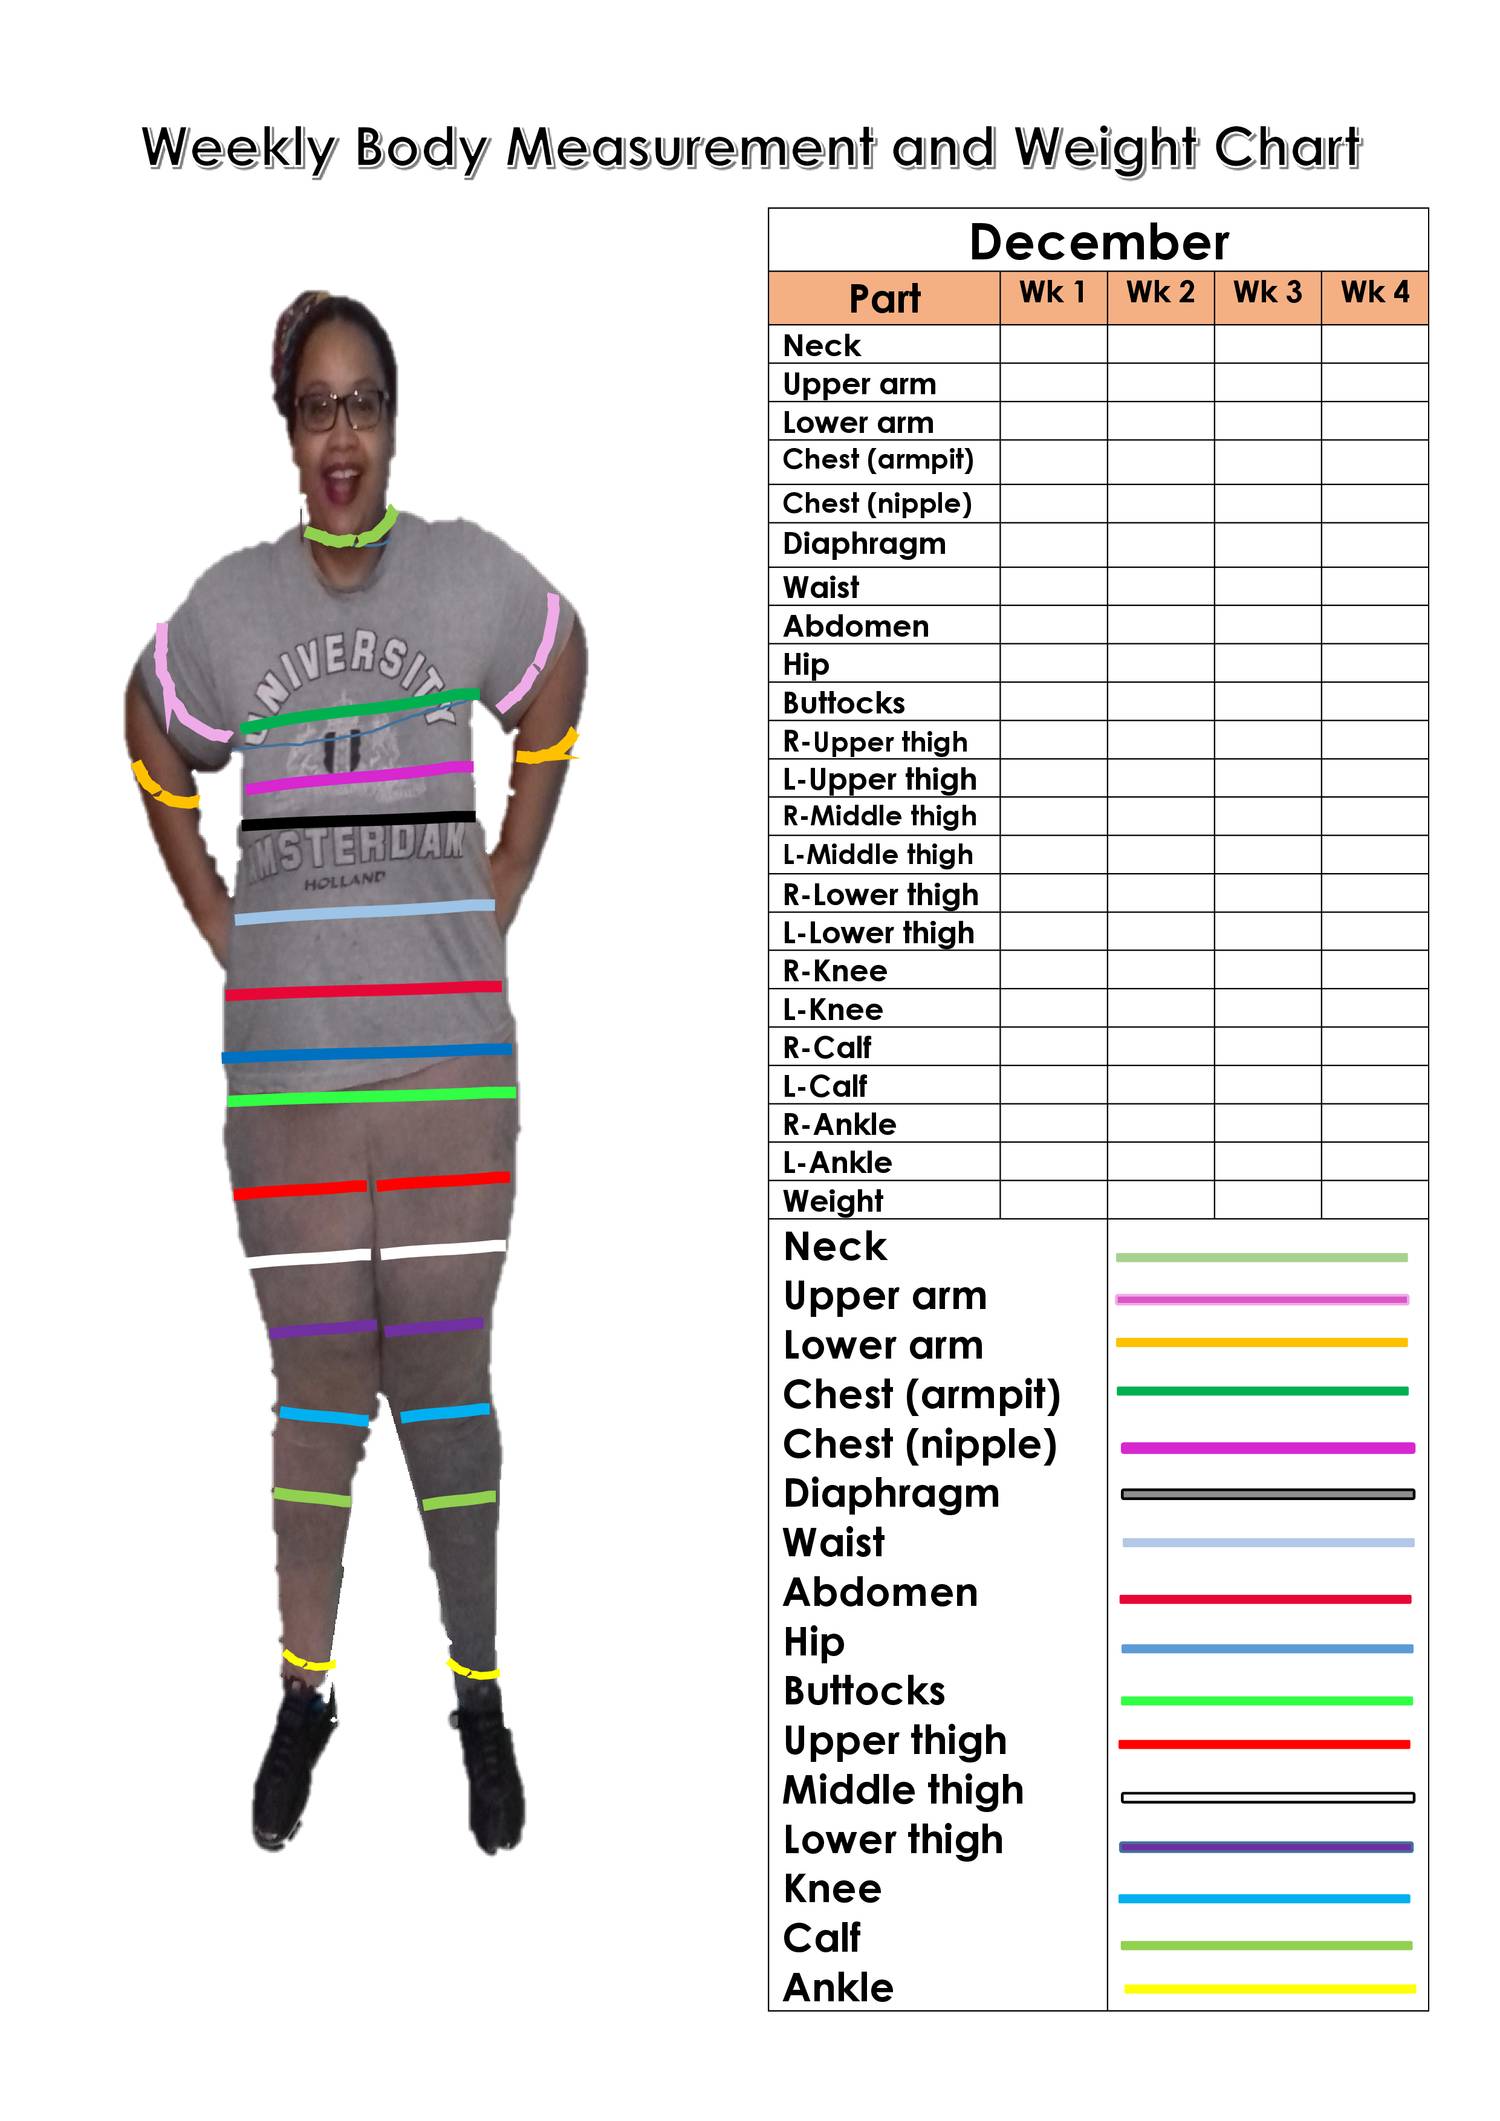 weekly-body-measurement-and-weight-chart-a4-docx-docdroid